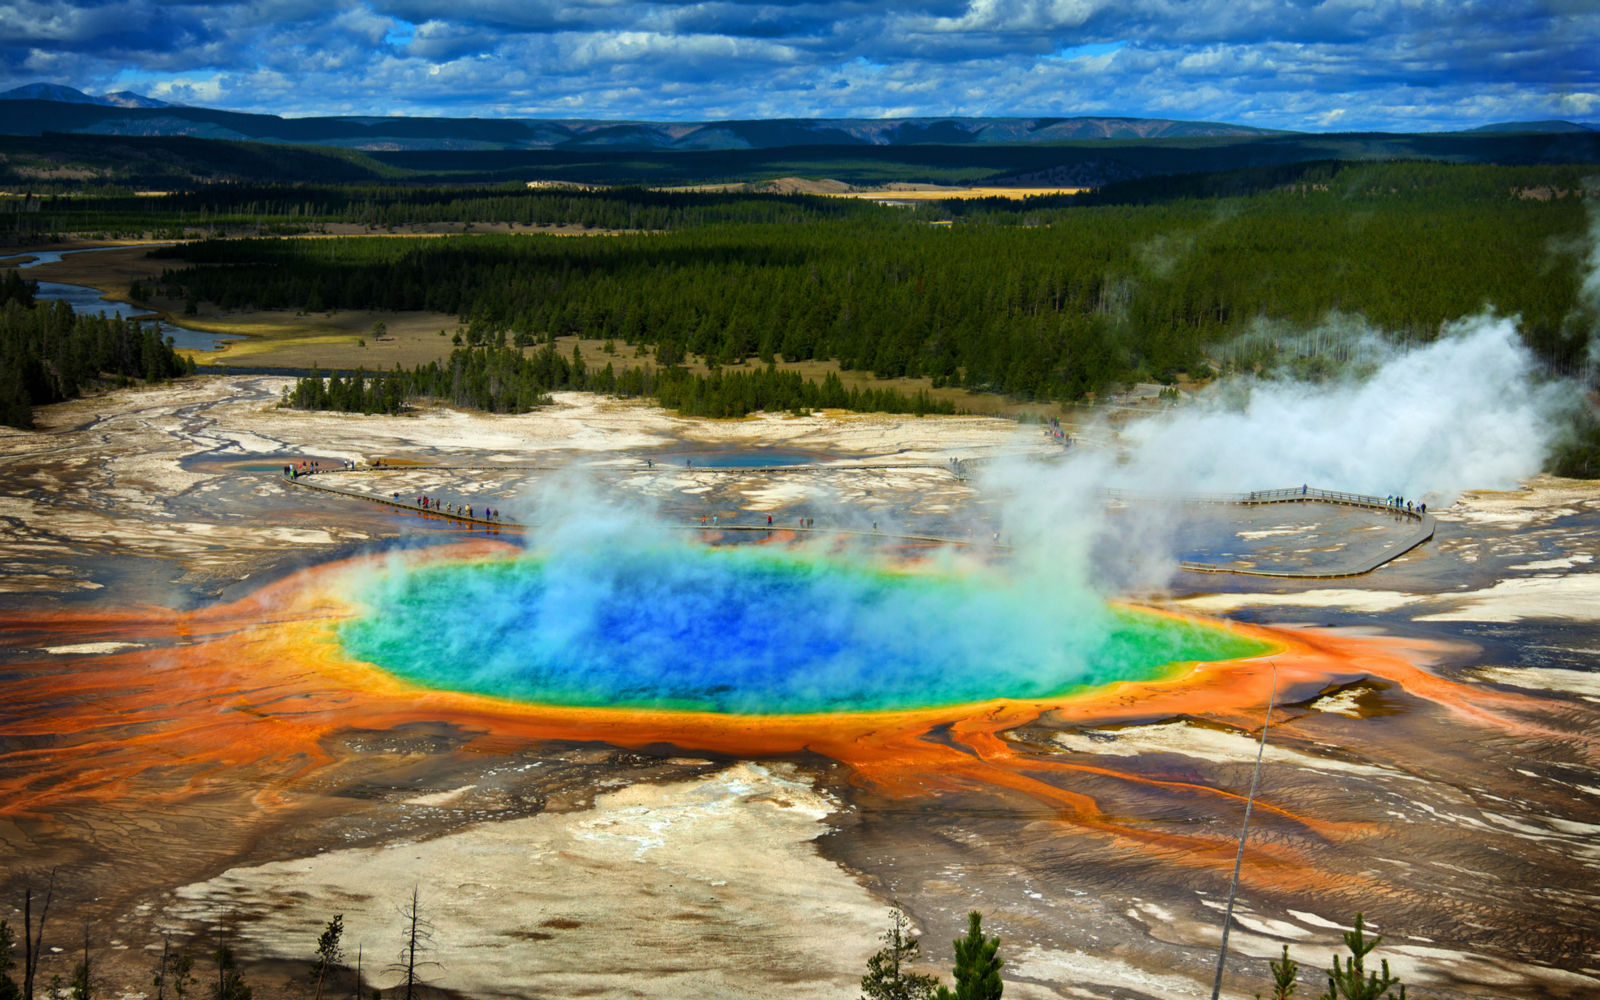 The Best Time to Visit Yellowstone in 2022